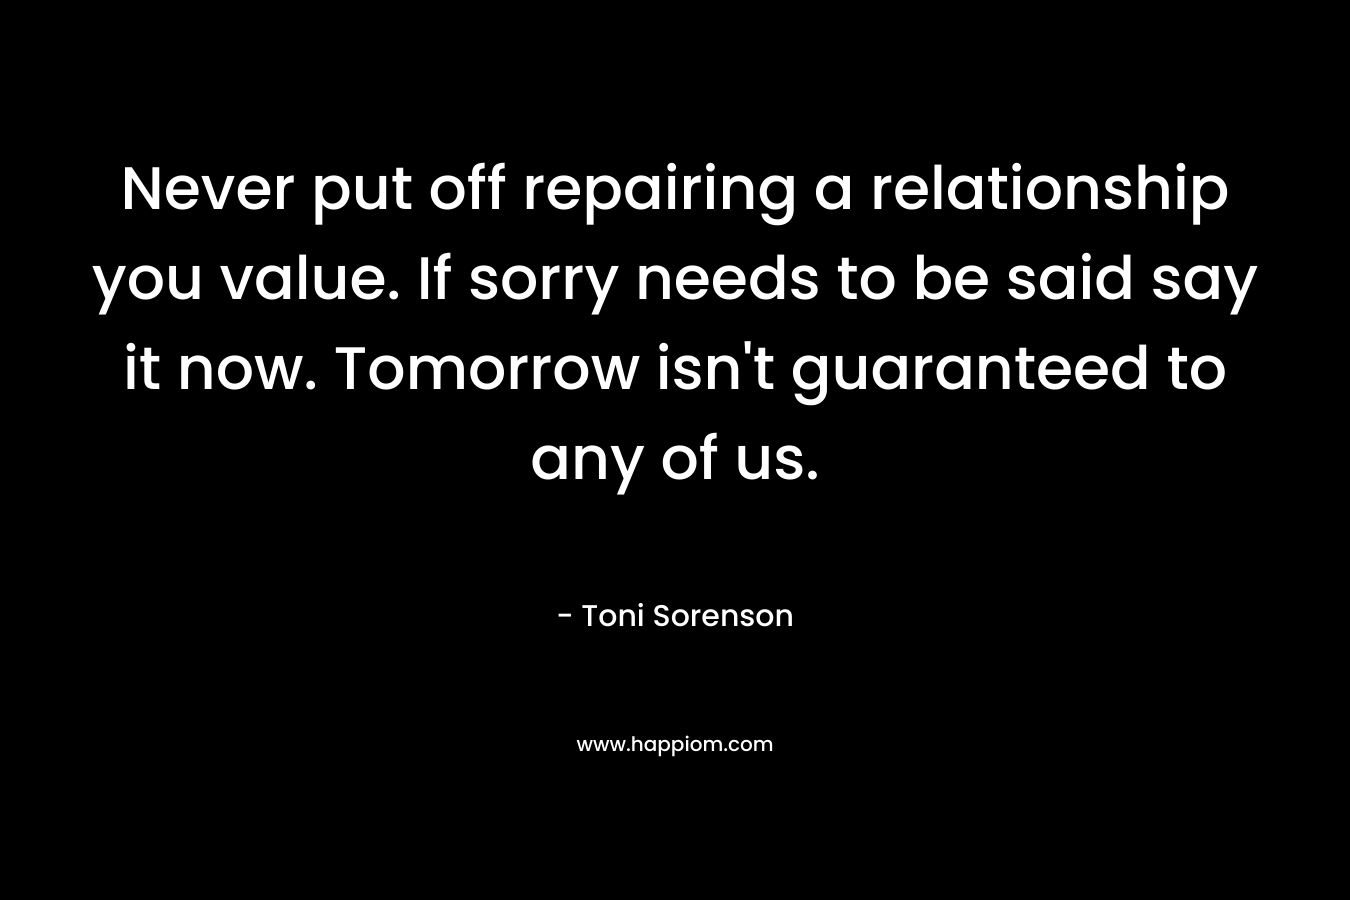 Never put off repairing a relationship you value. If sorry needs to be said say it now. Tomorrow isn't guaranteed to any of us.